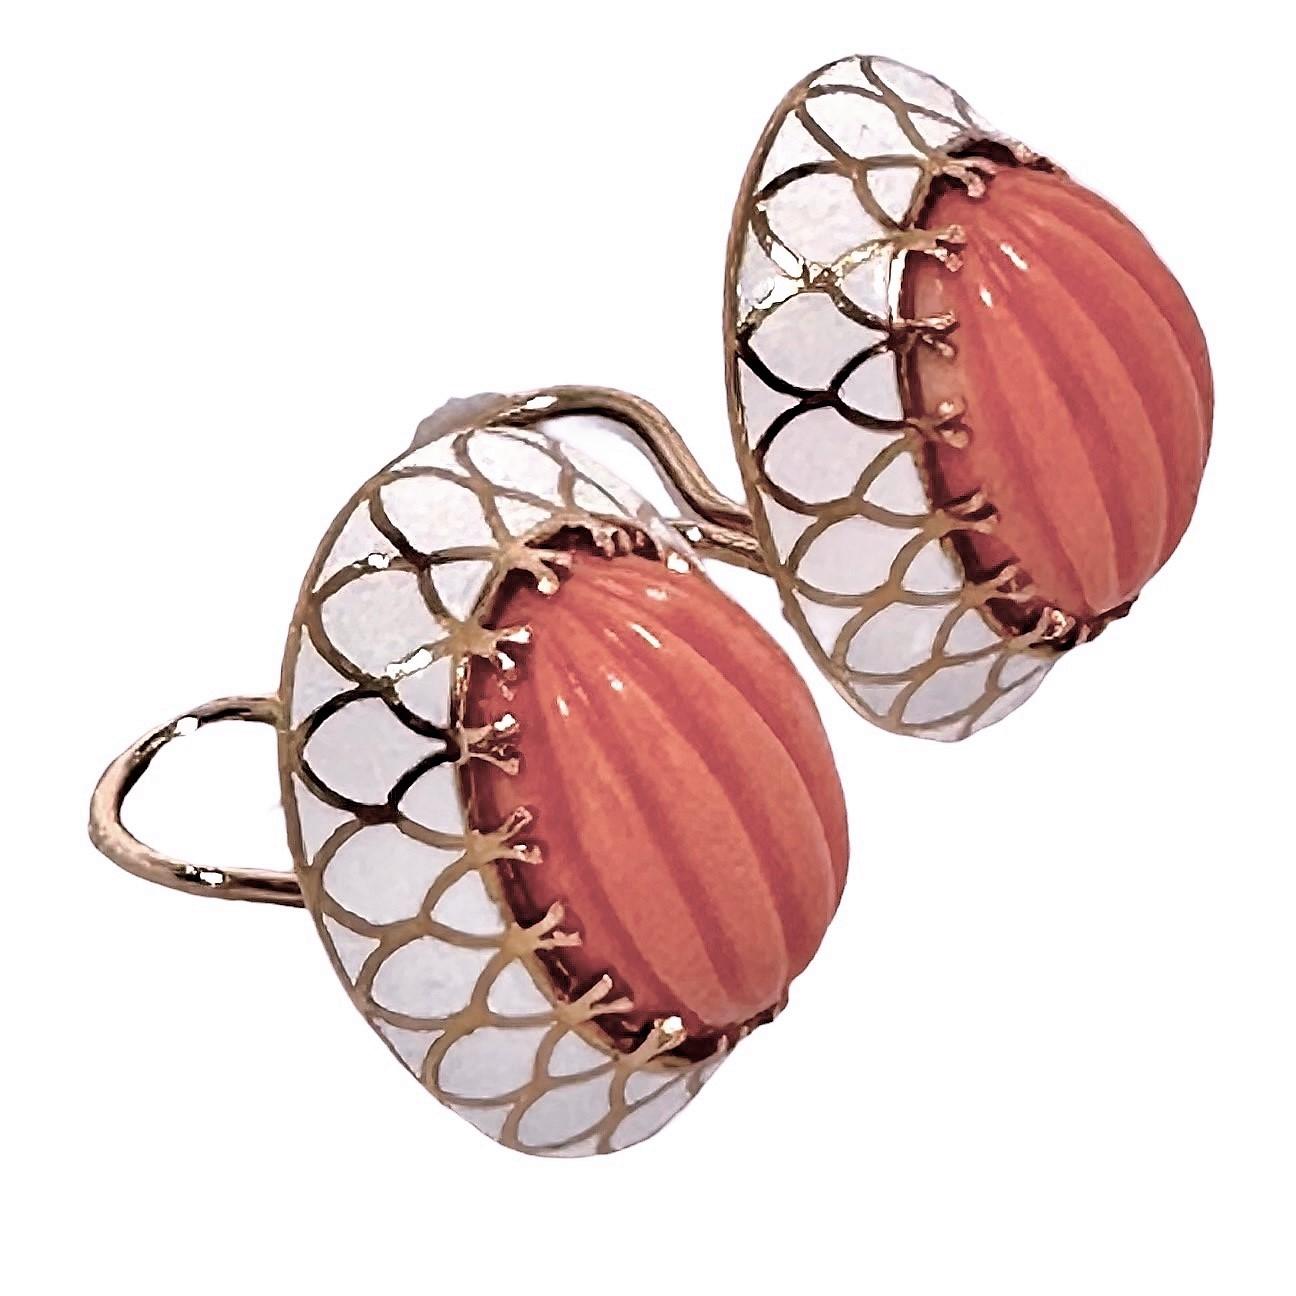 Women's 18k Yellow Gold, Salmon Color Coral and White Enamel Earrings - Great for Summer For Sale